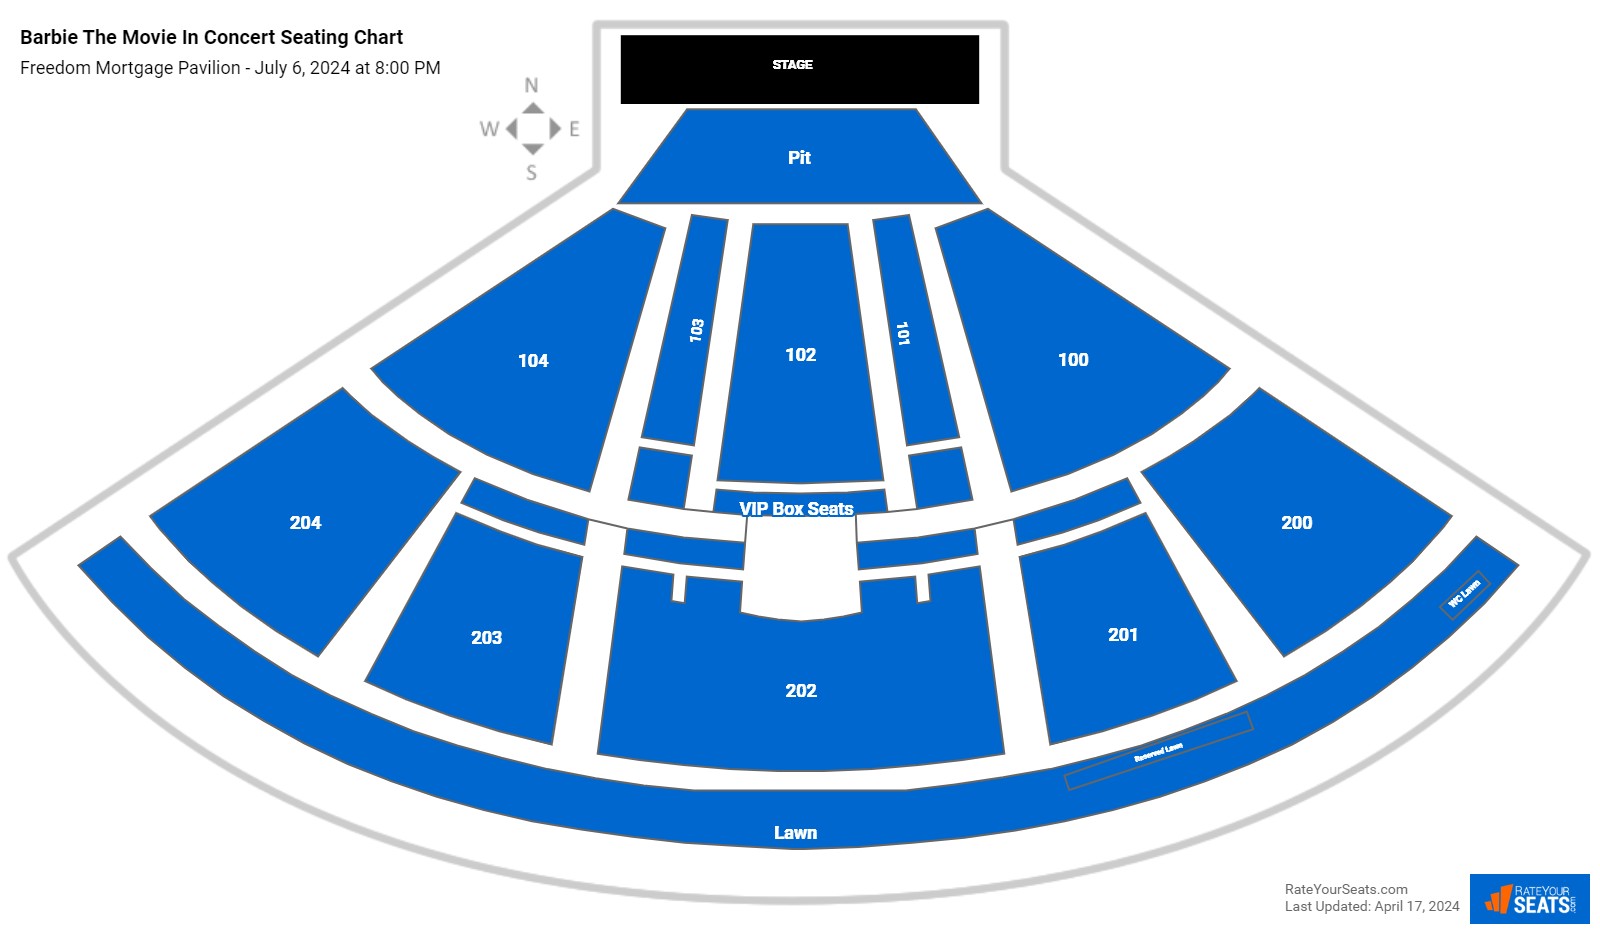 Barbie The Movie In Concert seating chart Freedom Mortgage Pavilion